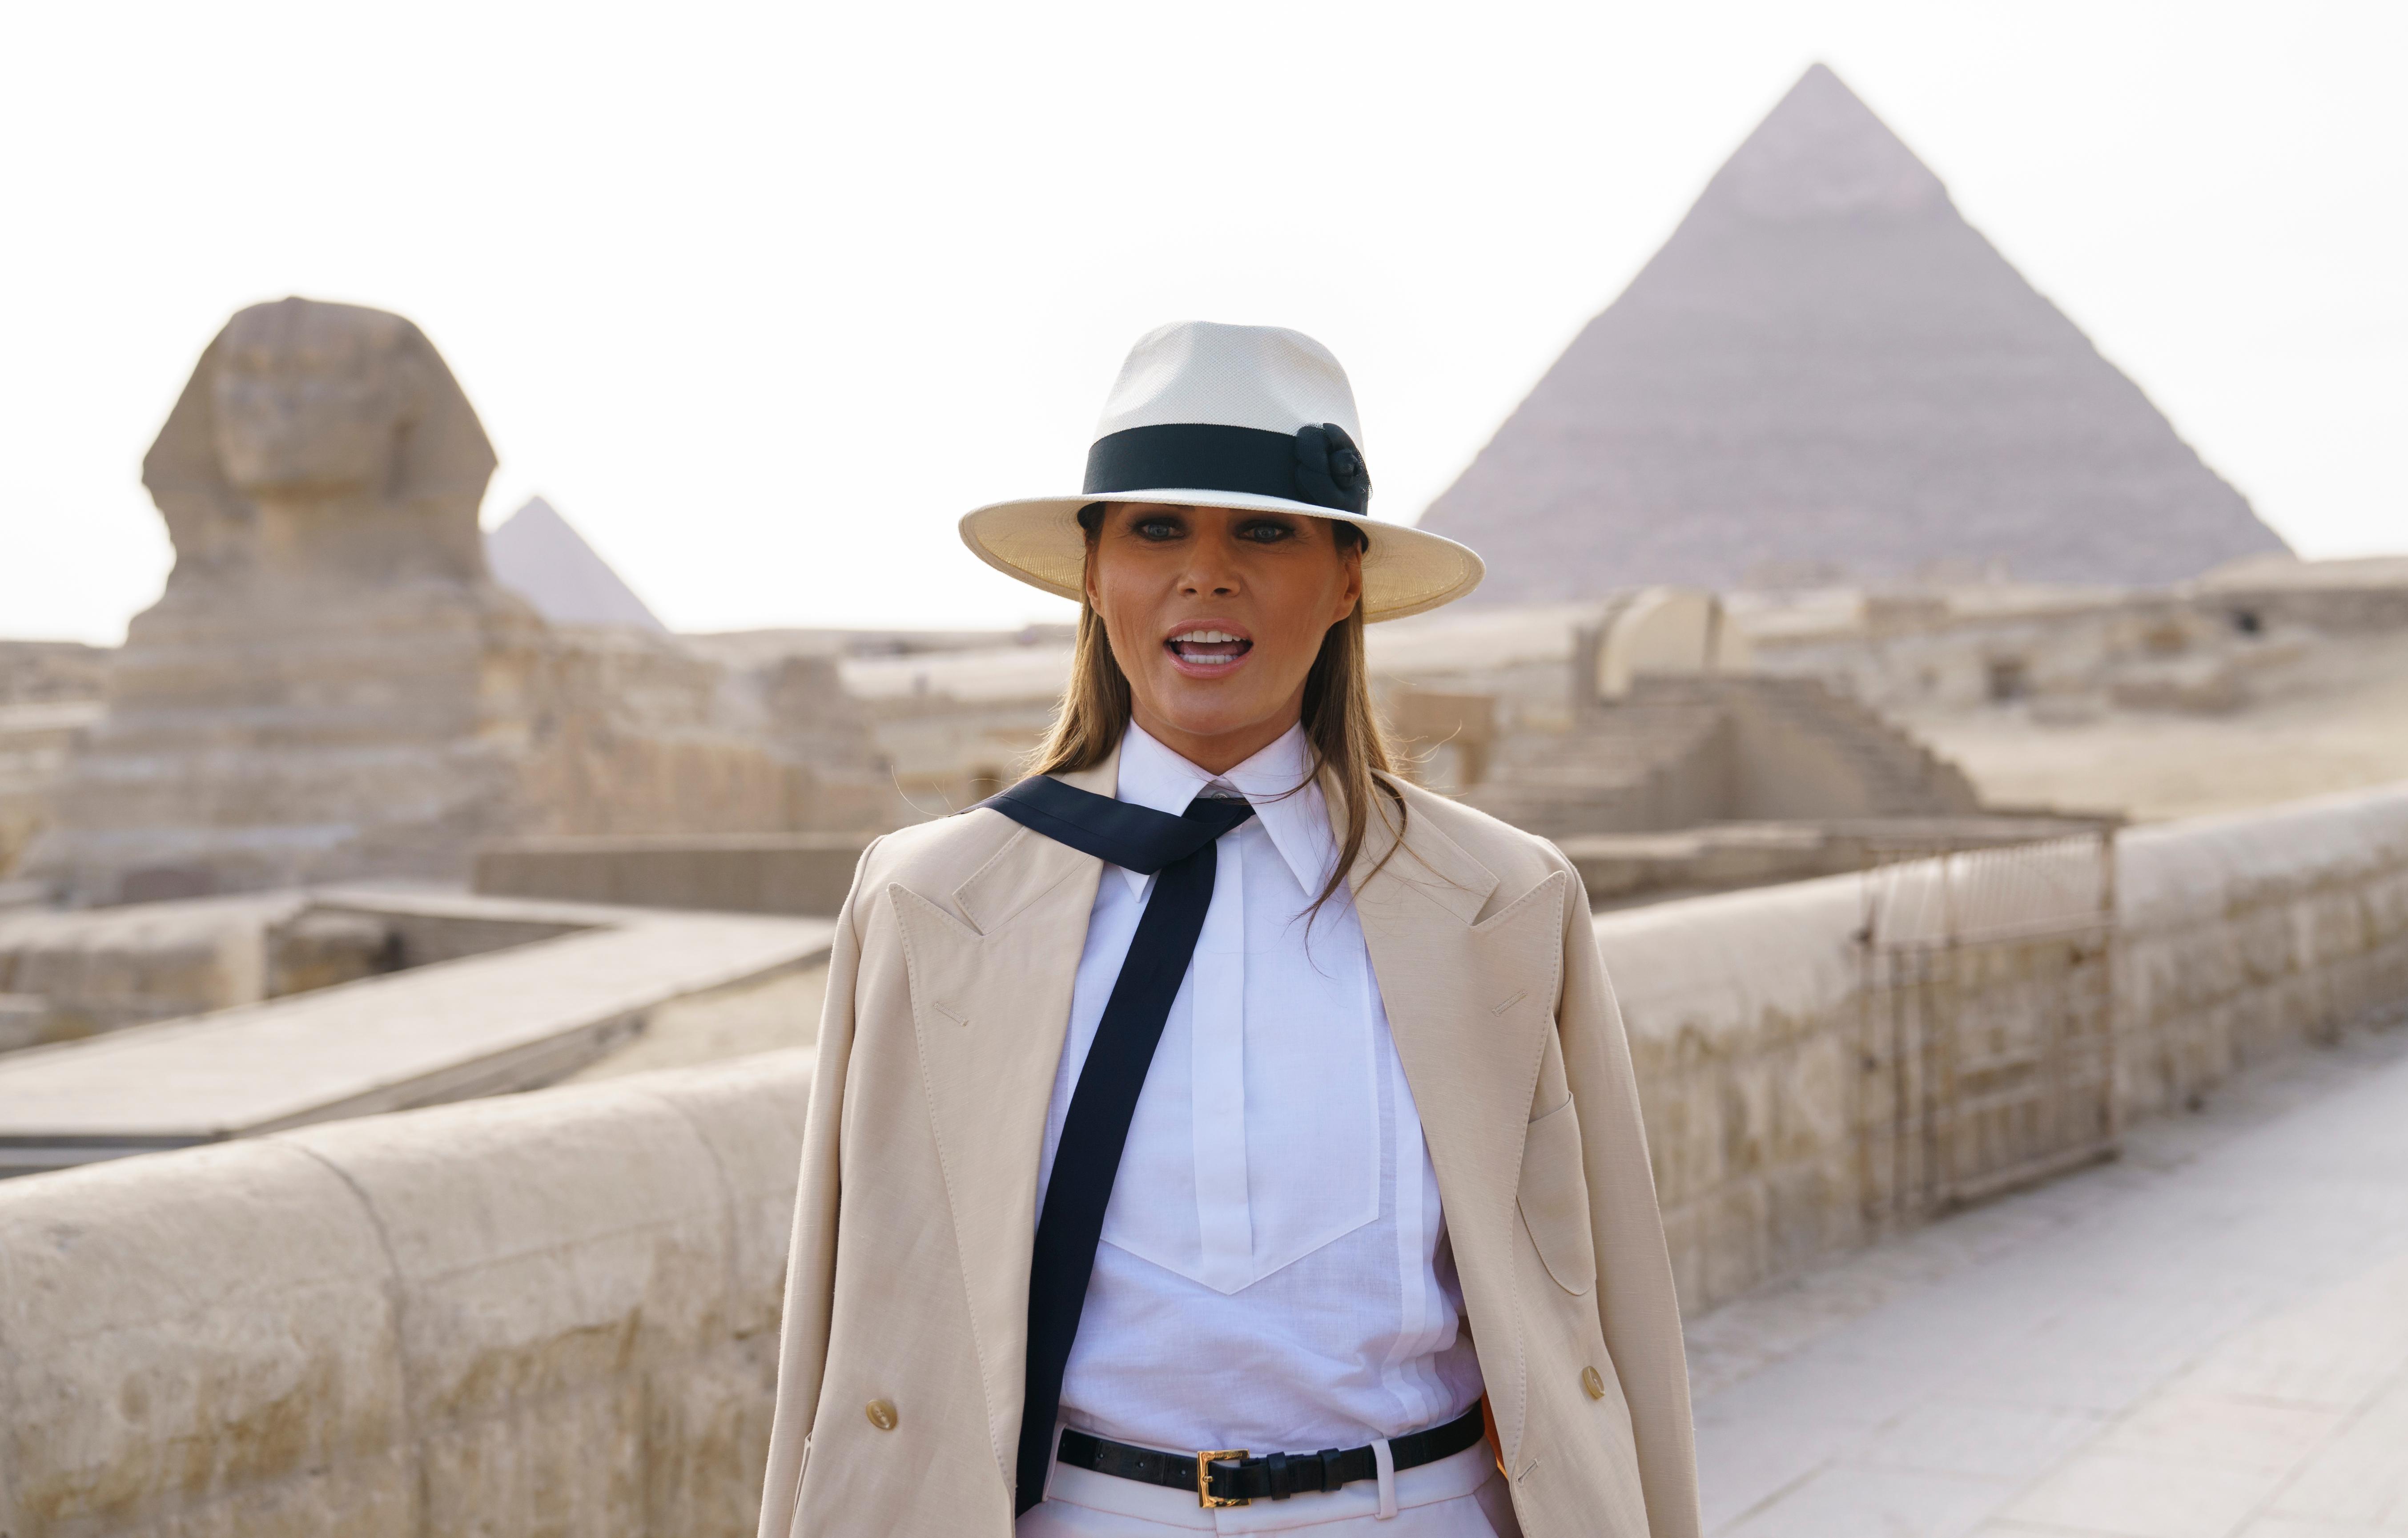 U.S. First Lady Melania Trump tours the Pyramids and Sphinx, Giza, Egypt, October 6, 2018.